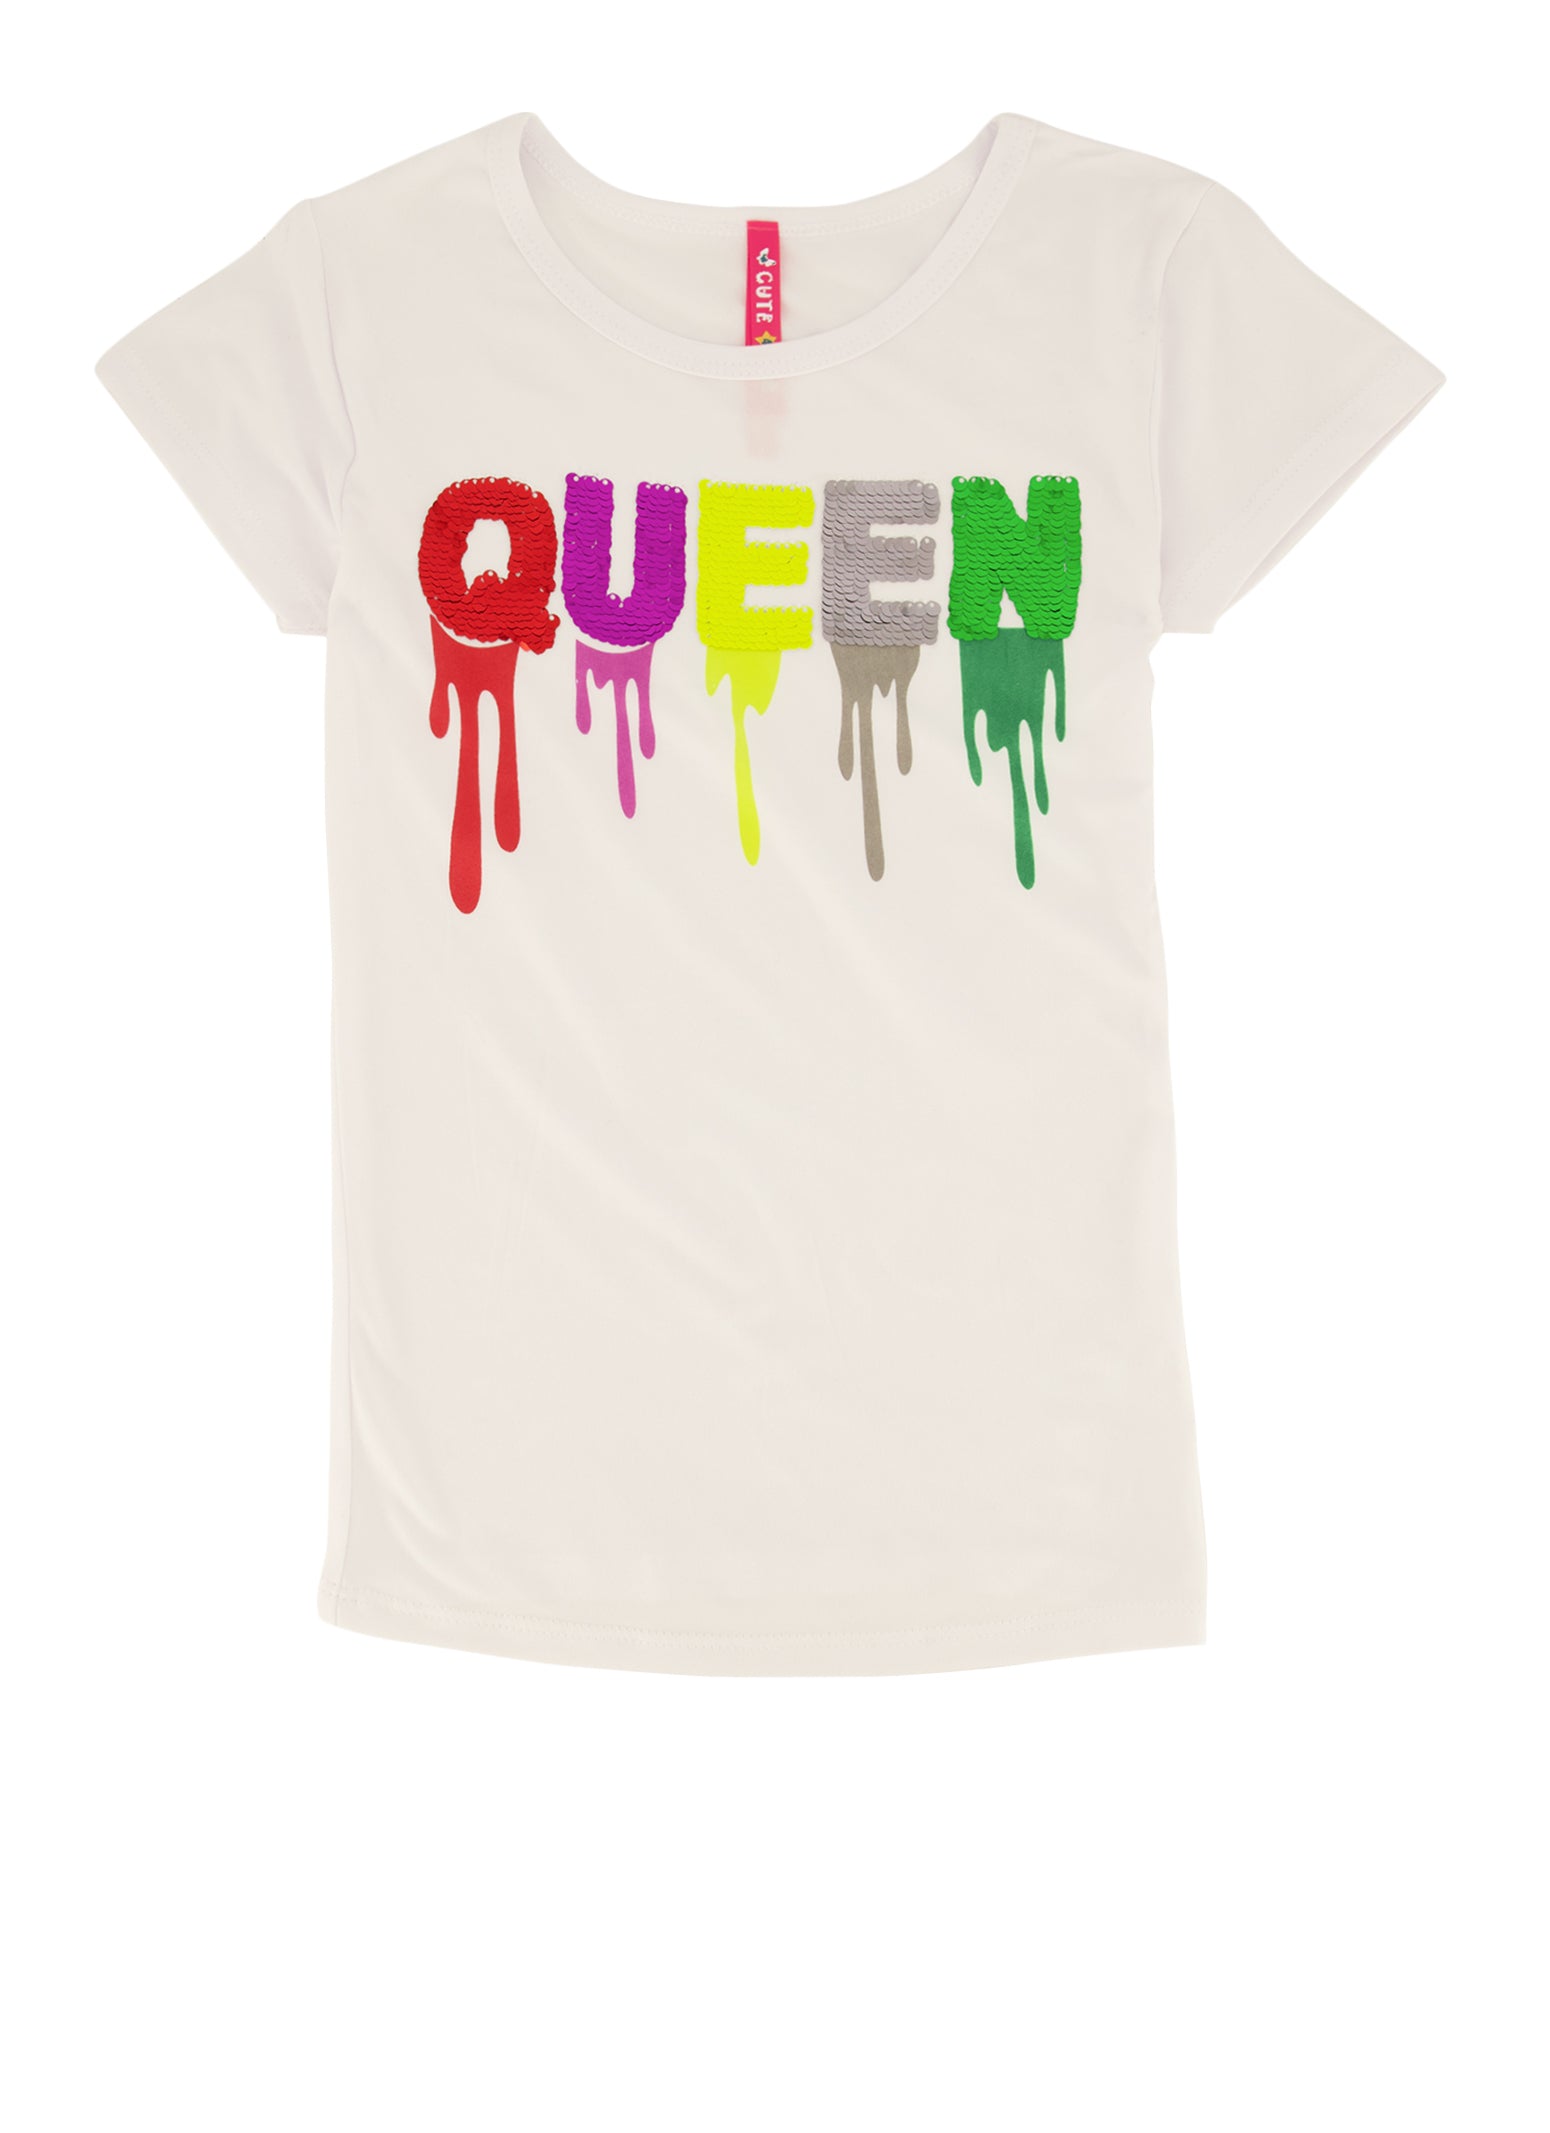 Little Girls Reversible Sequin Queen Graphic Tee, White, Size 4